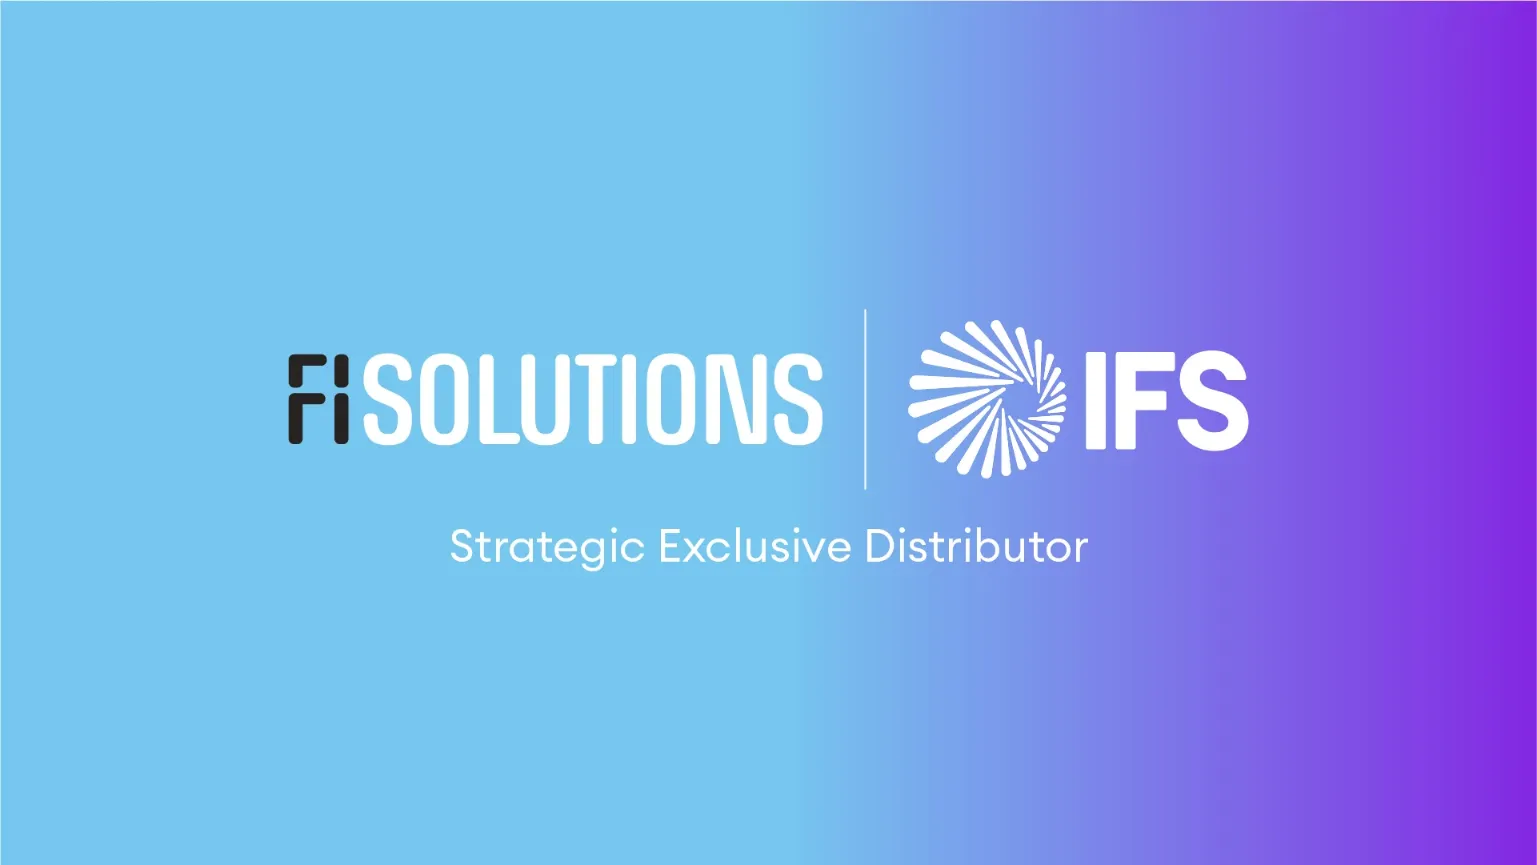 This is the joint logo between FI Solutions & IFS concerning their strategic exclusive distributions agreement in Italy